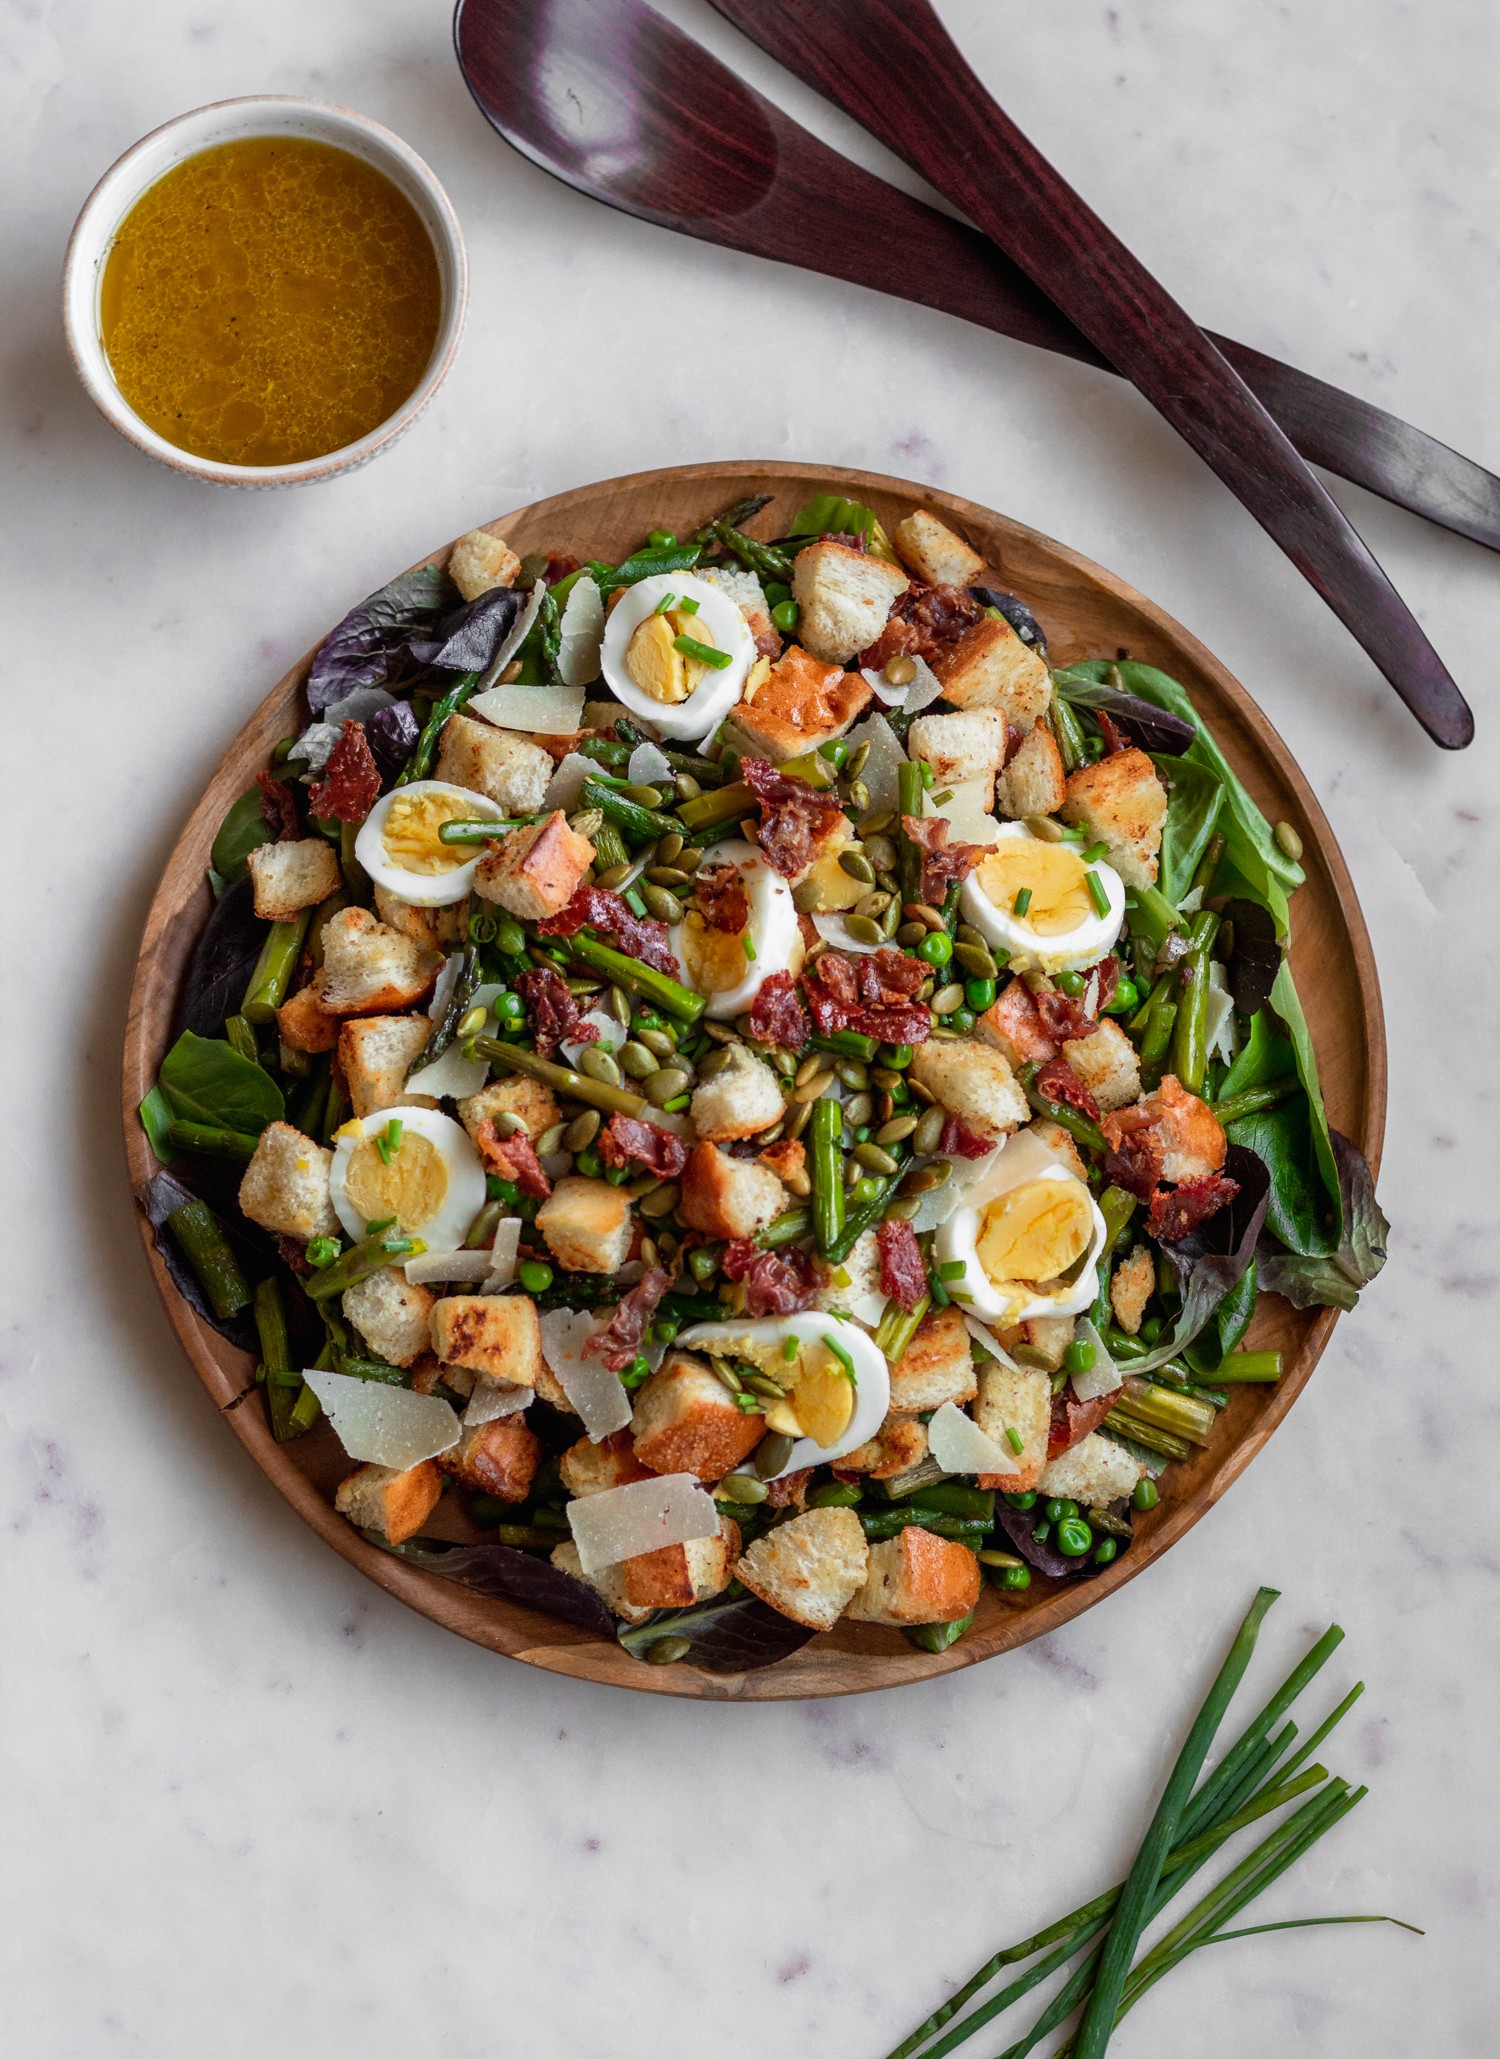 An overhead image of a wood plate with a Spring Panzanella salad with greens, spring veggies, hard boiled eggs, and croutons on a marble counter next to a white bowl of dressing and wood salad tossers.